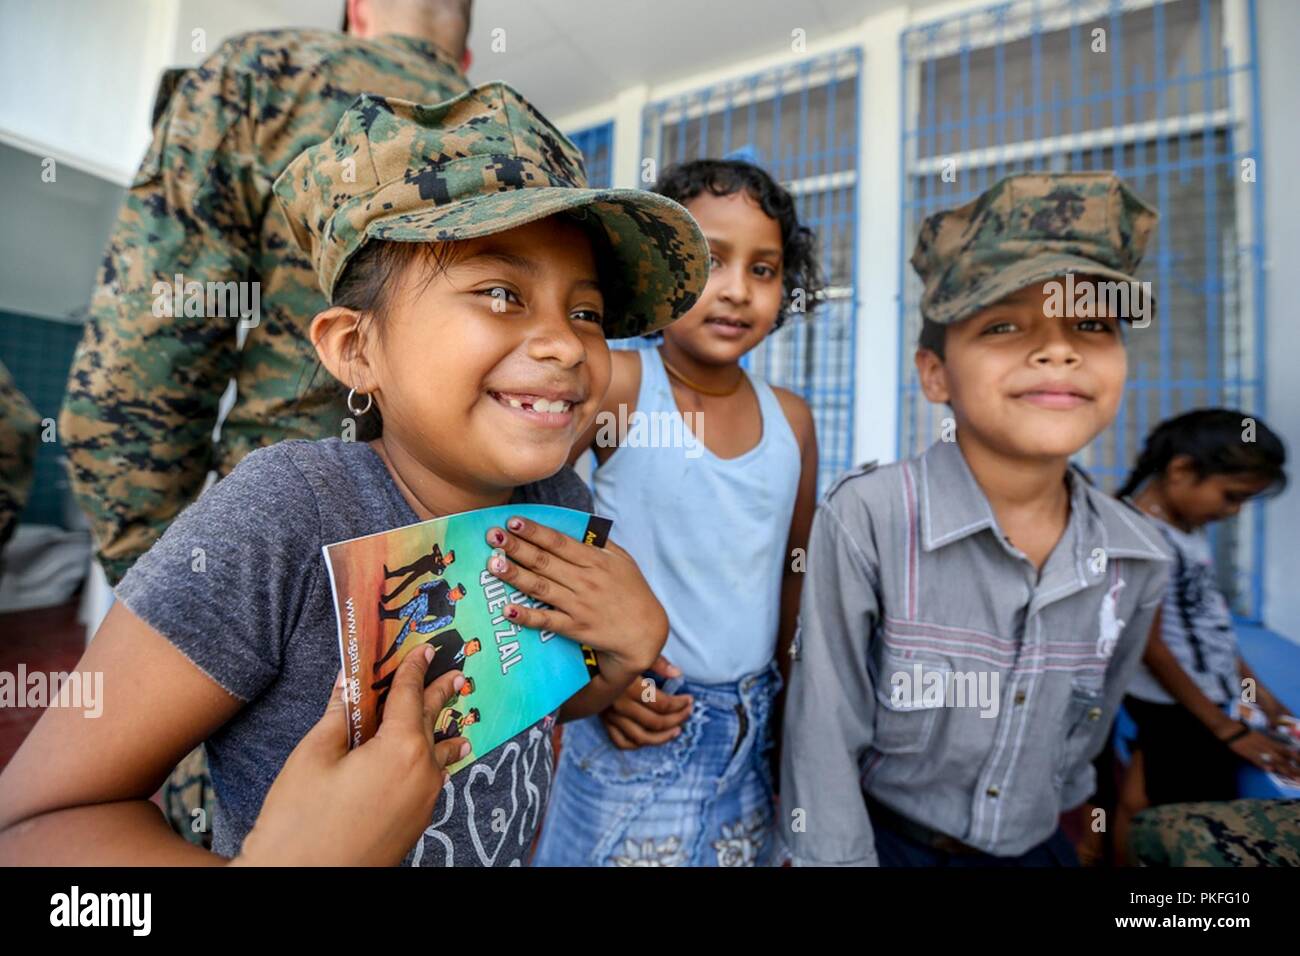 Guatemalan children smile and hold booklets given to them by Guatemalan Army engineers in La Paz, Guatemala, Aug. 6, 2018 . The Marines and sailors of SPMAGTF-SC are conducting security cooperation training and engineering projects alongside partner nation military forces in Central and South America. The unit is also on standby to provide humanitarian assistance and disaster relief in the event of a hurricane or other emergency in the region. Stock Photo